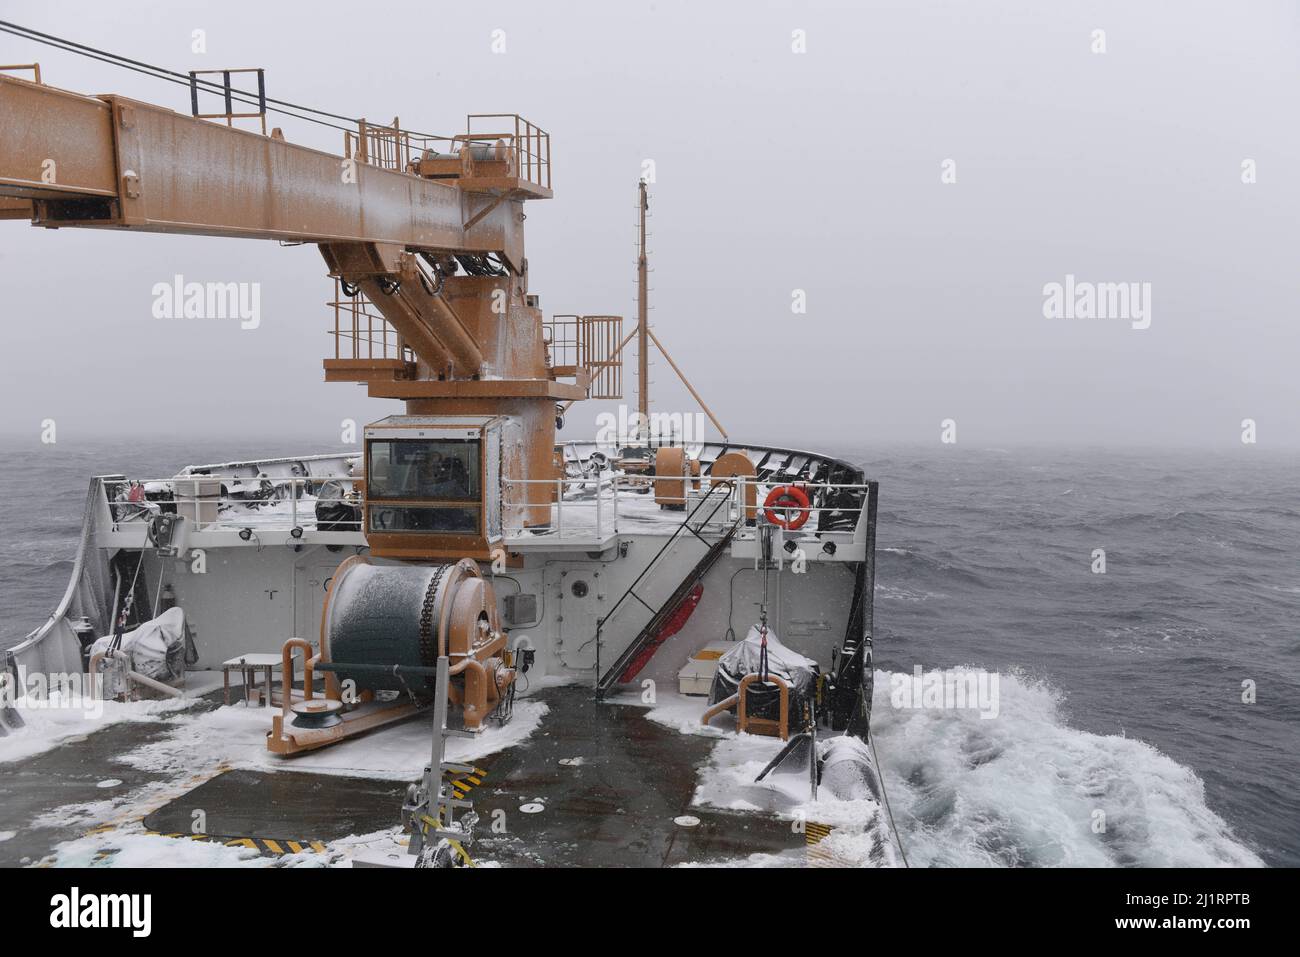 U.S. Coast Guard Cutter Spar underway with limited visibility in the Atlantic Ocean during its homebound transit to Duluth, Minn. after a year-long maintenance period in Baltimore, March 20, 2022. CGC Spar is a 225’ Juniper Class Buoy Tender and the newest addition to the Coast Guard Ninth District fleet. (U.S. Coast Guard photo by Petty Officer 3rd Class Gregory Schell) Stock Photo